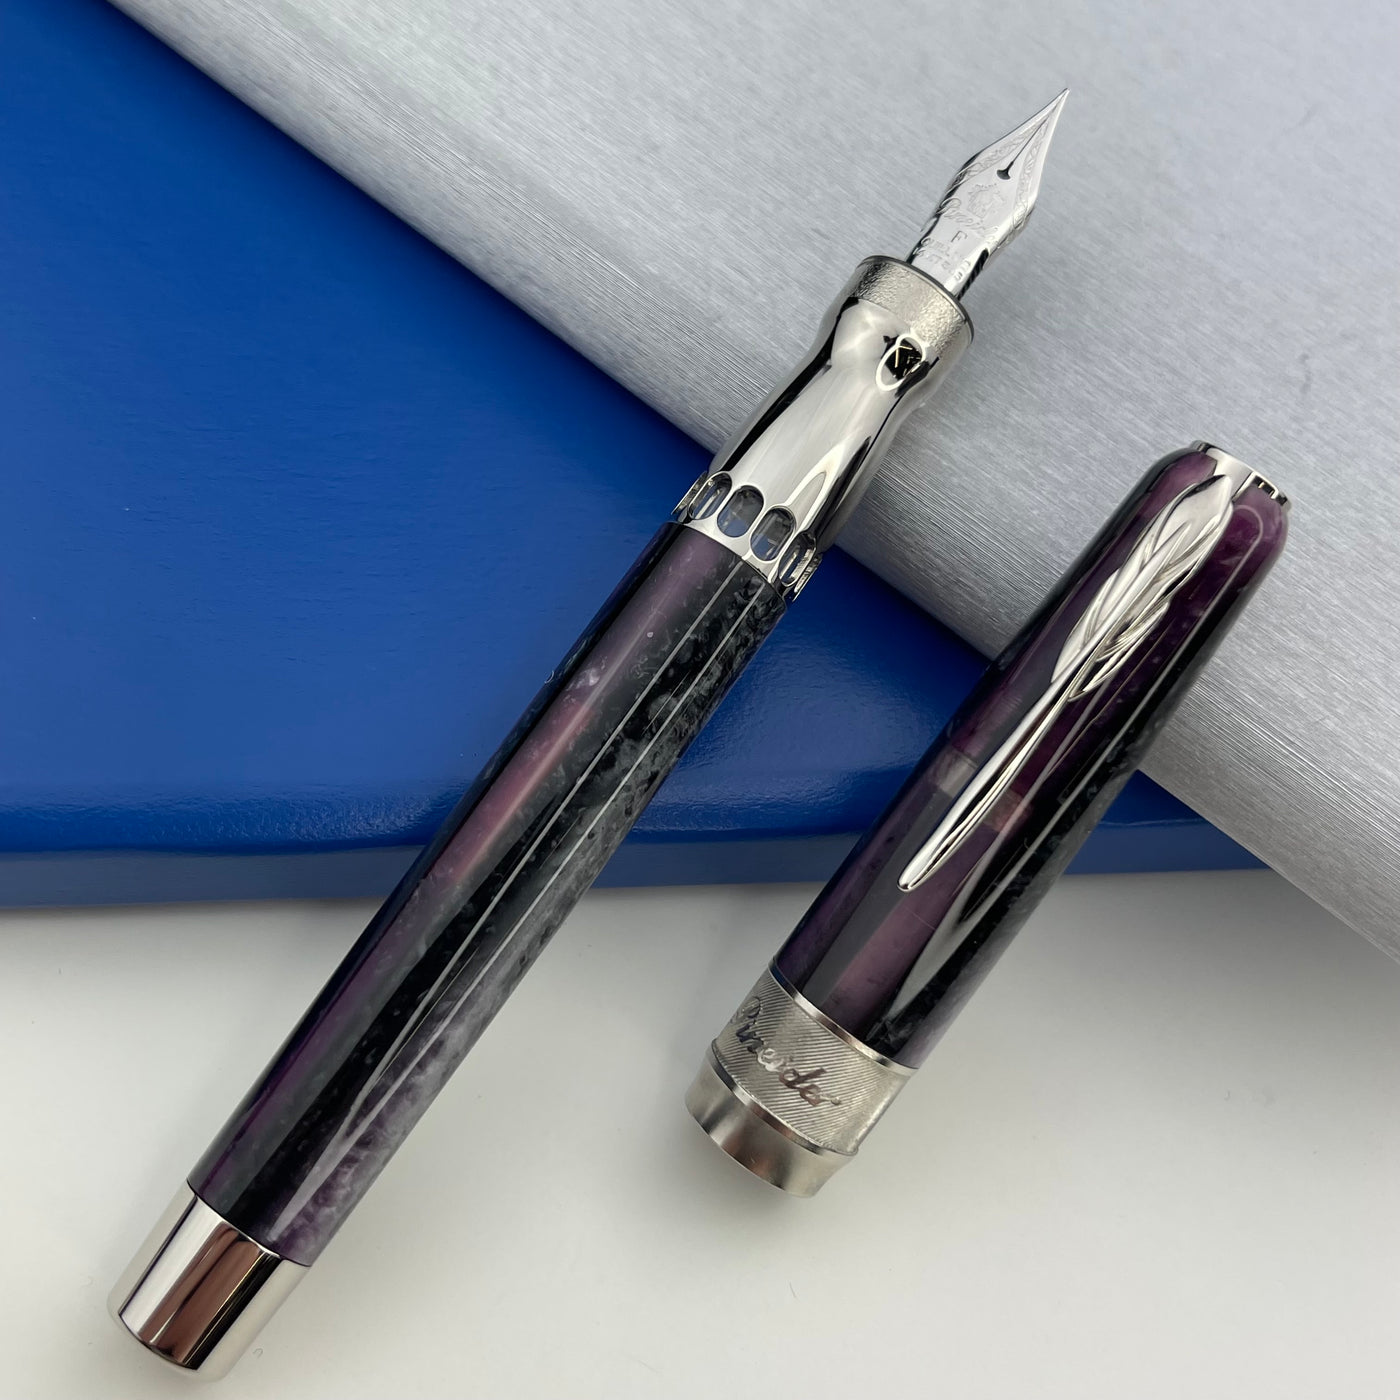 Pineider Arco Fountain Pen - Violet (Limited Edition)